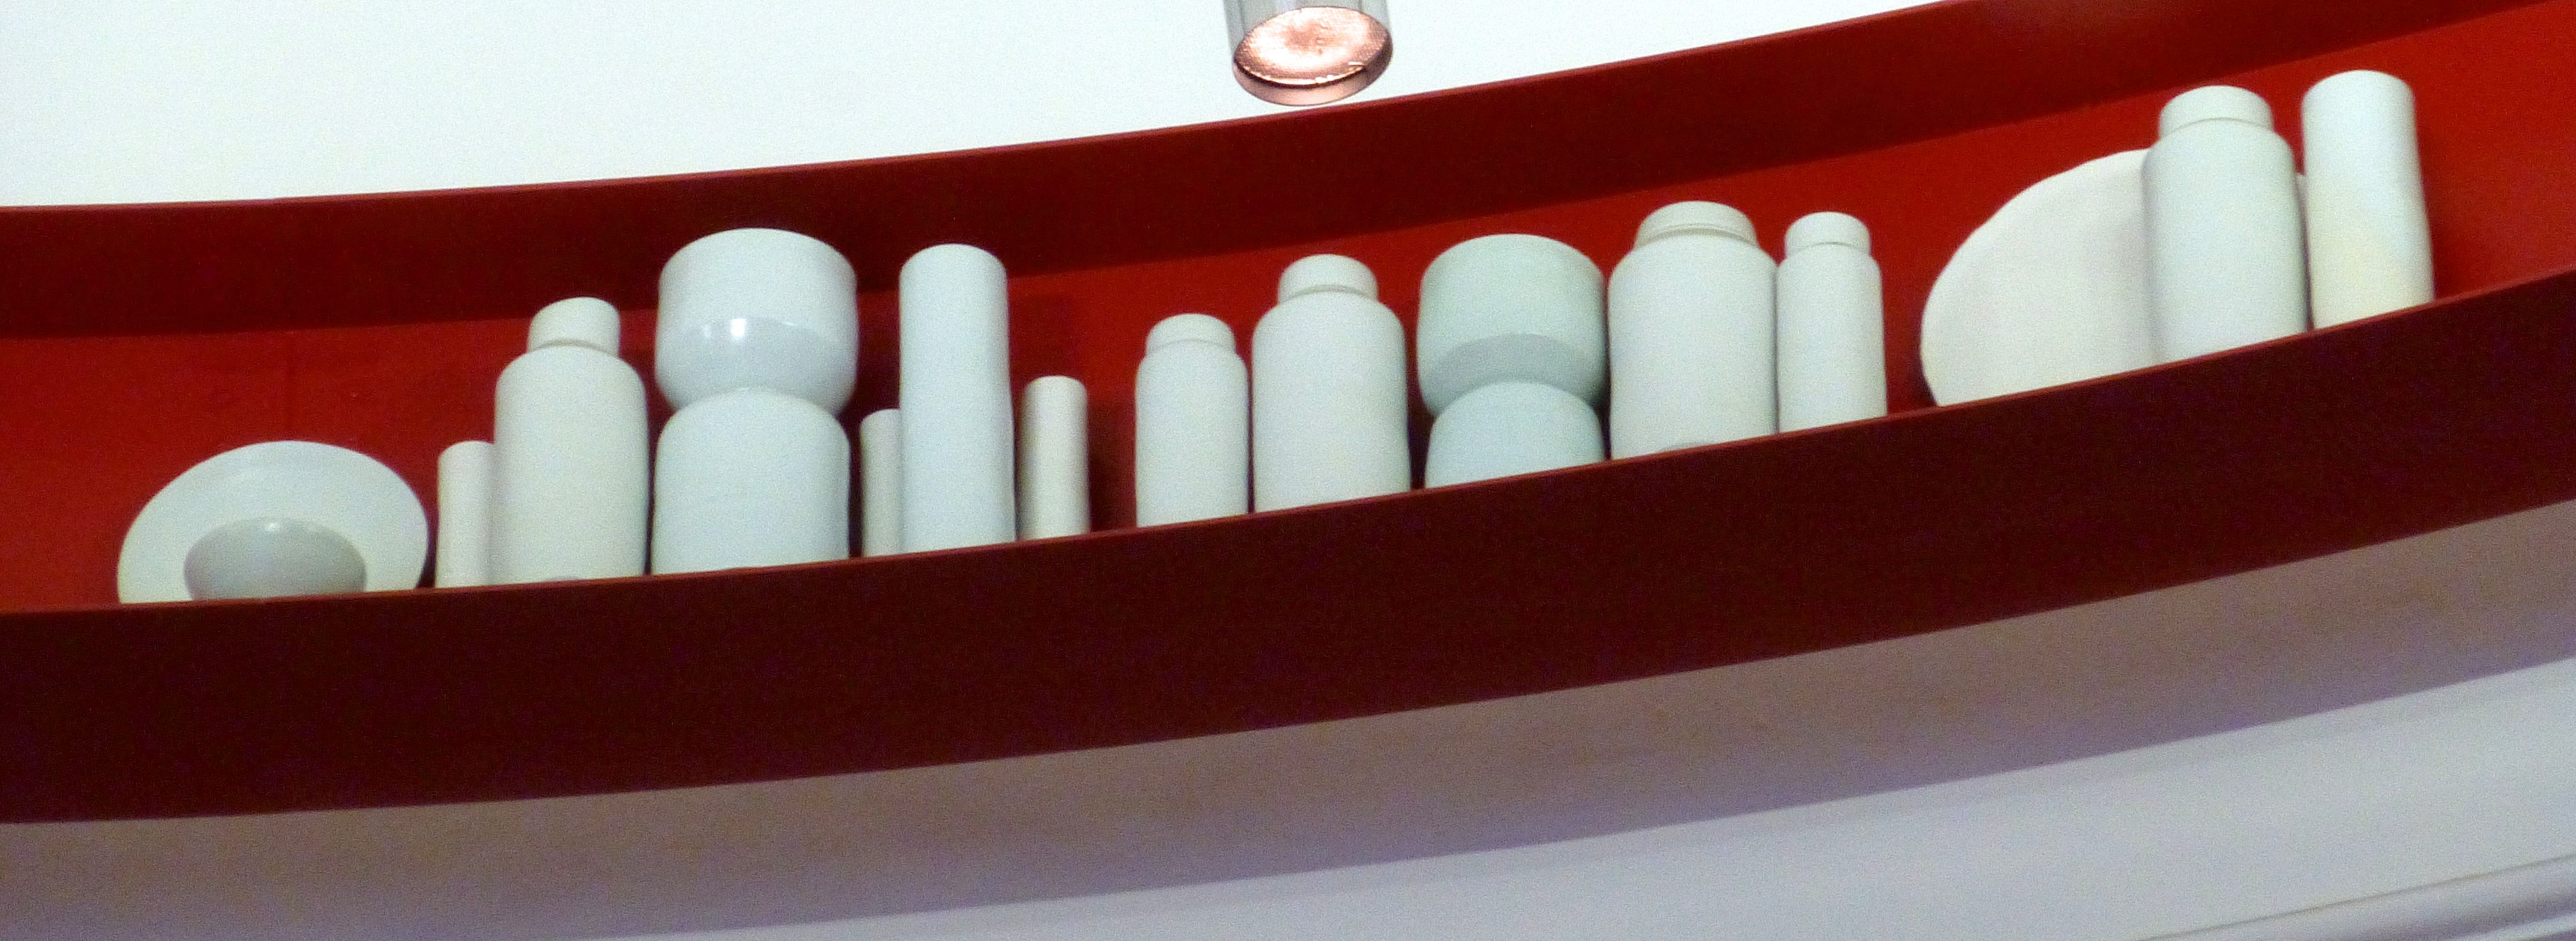 Read more about the article Finding Edmund de Waal in London